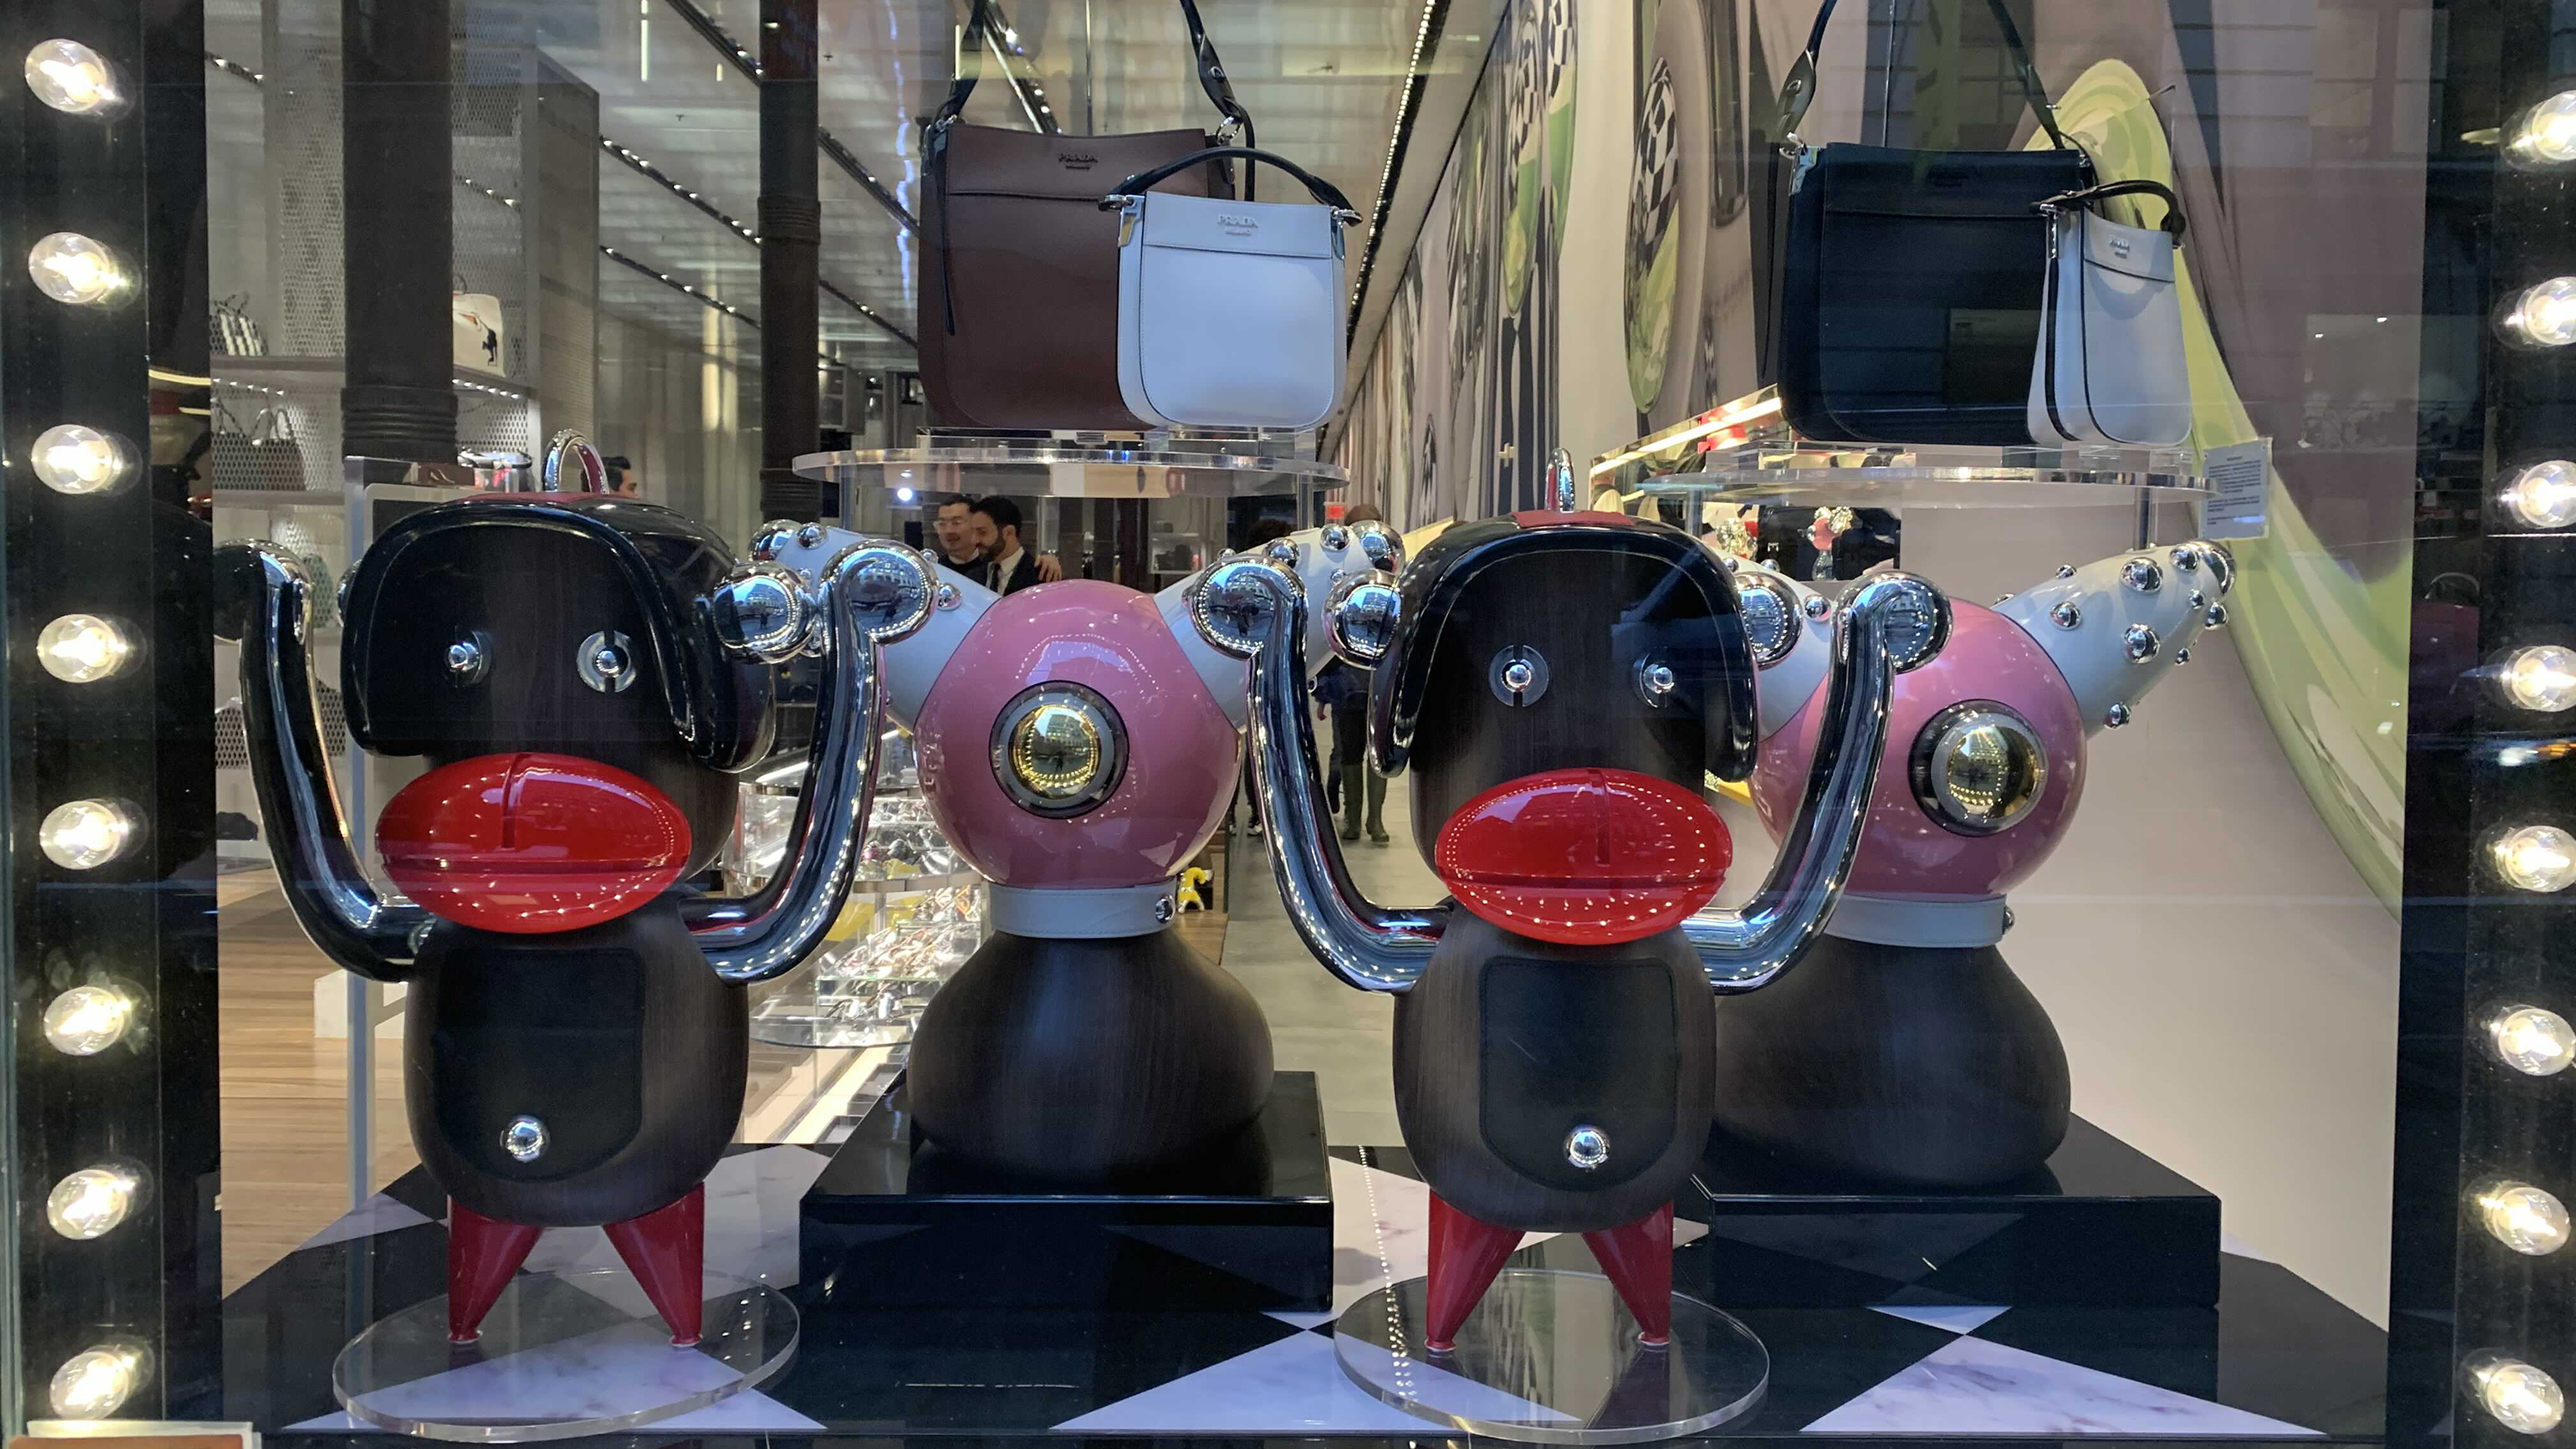 Prada Pulls Products After Accusations Of Blackface Imagery Cnn Style